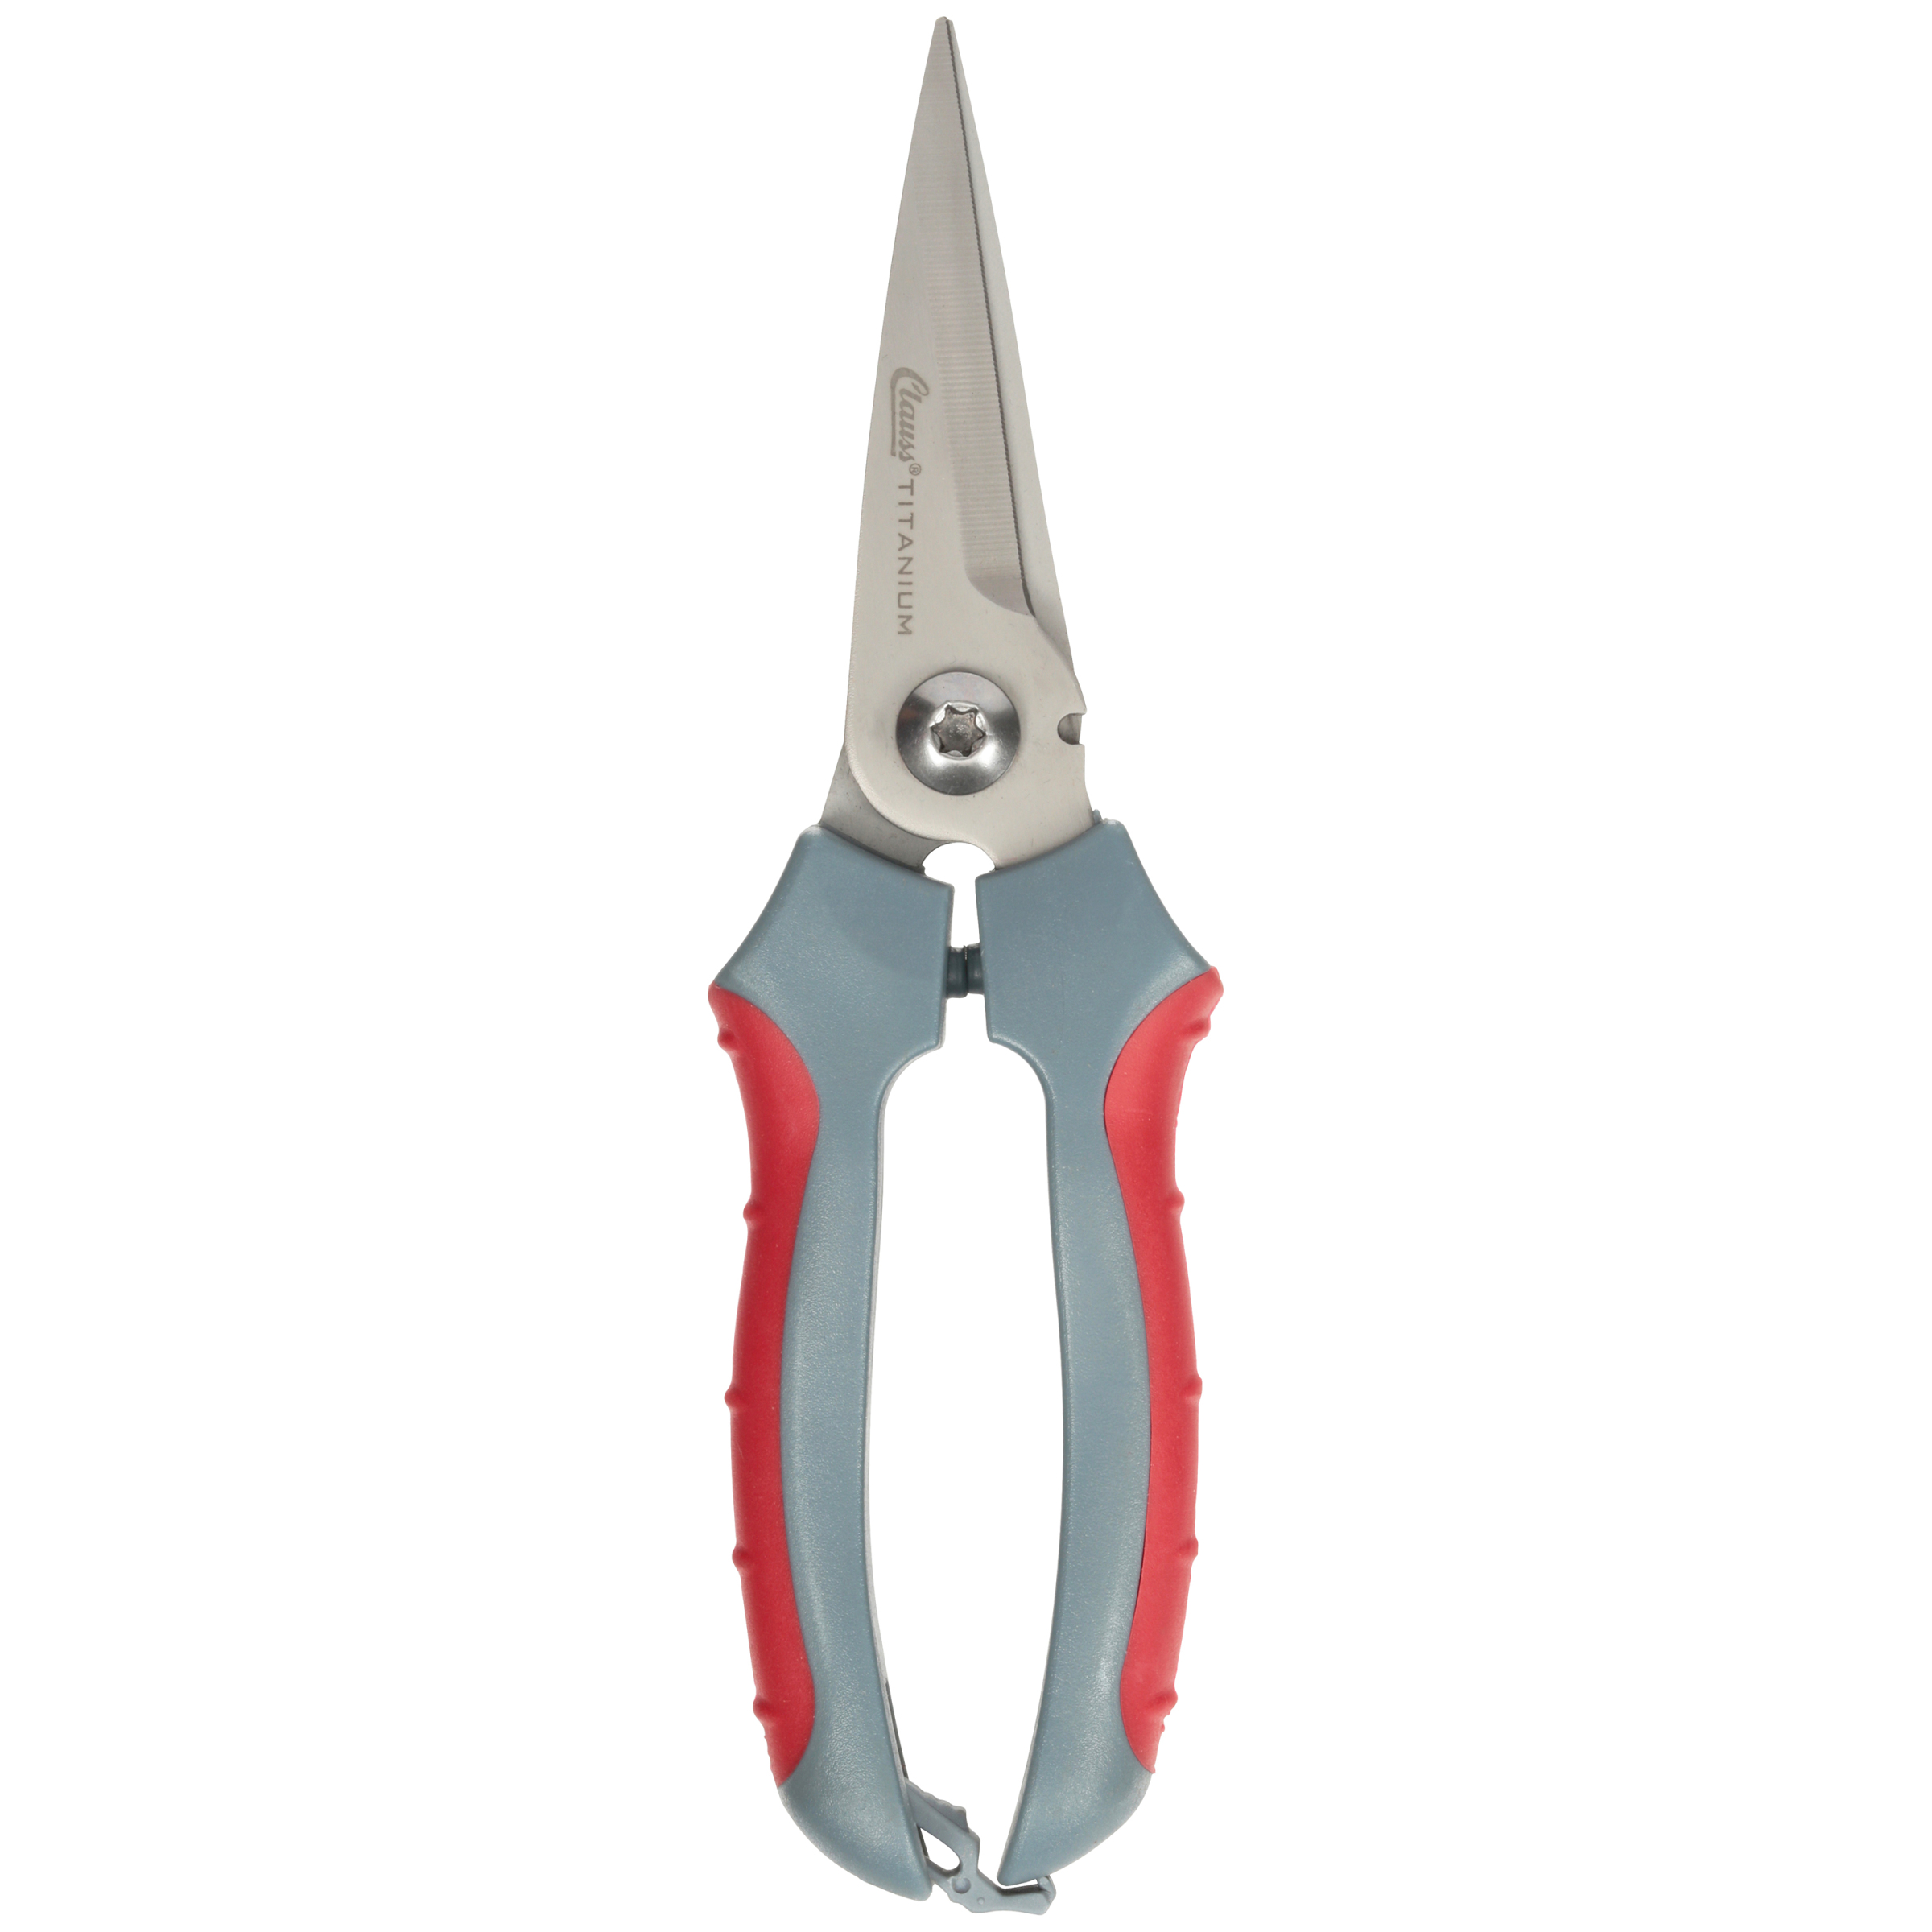 Clauss 8" Titanium Bonded Straight Micro-Serrated Snip, Hand Tool Pliers, Red and Gray - image 1 of 8